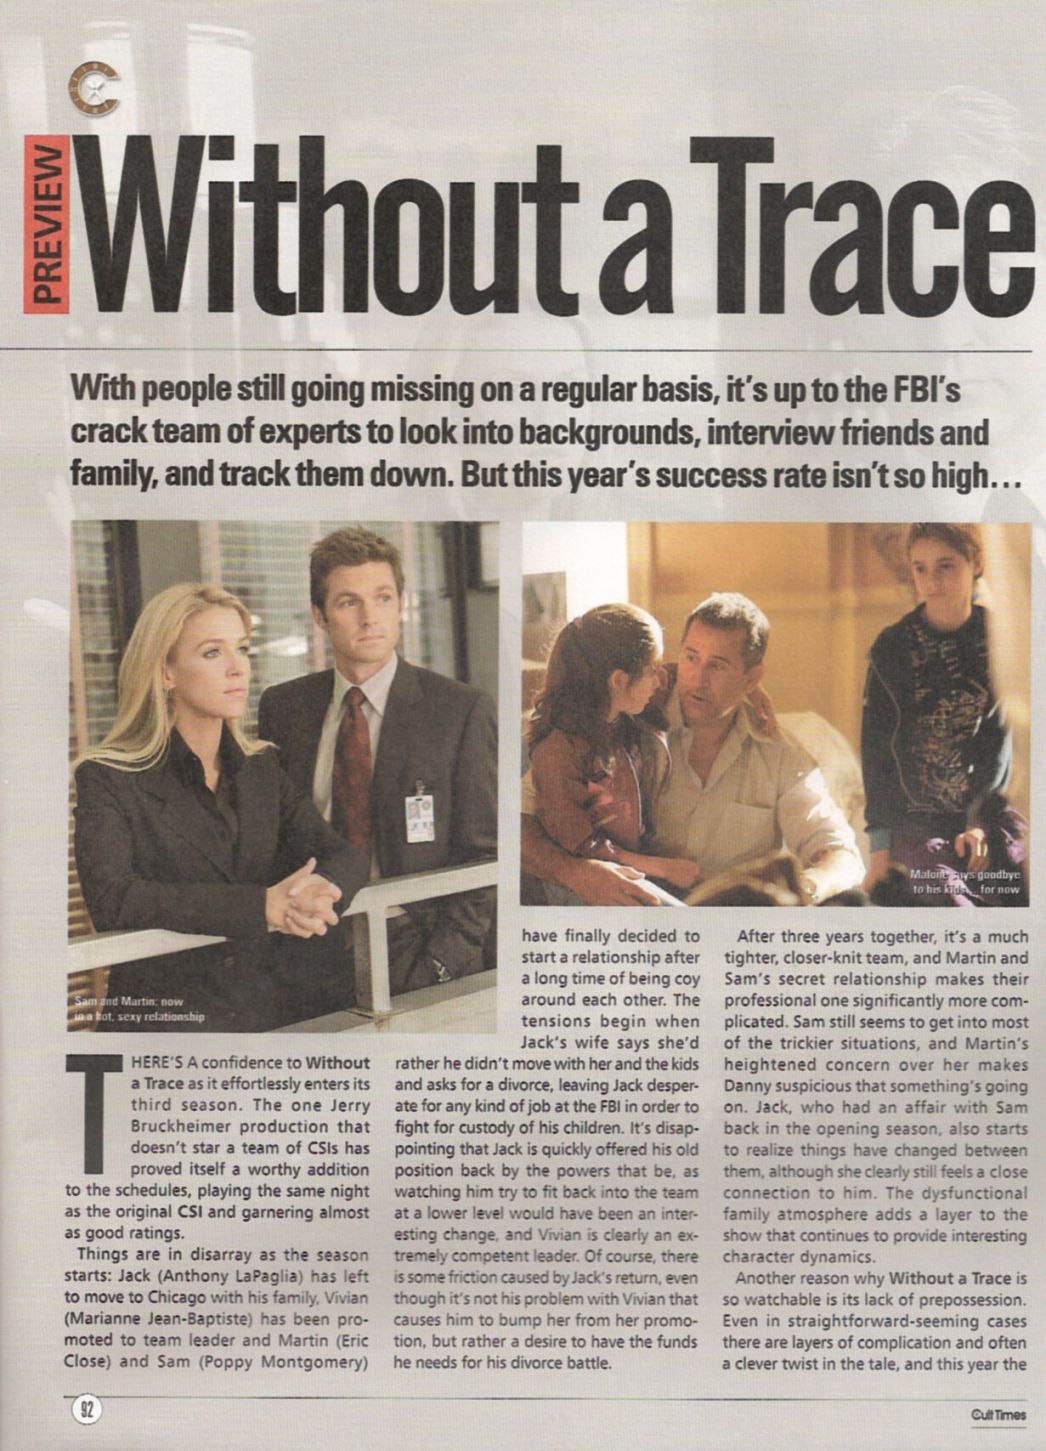 Cult Times Special #32 - Dec 2004 - Without A Trace - Page 1
Keywords: ;wat_media